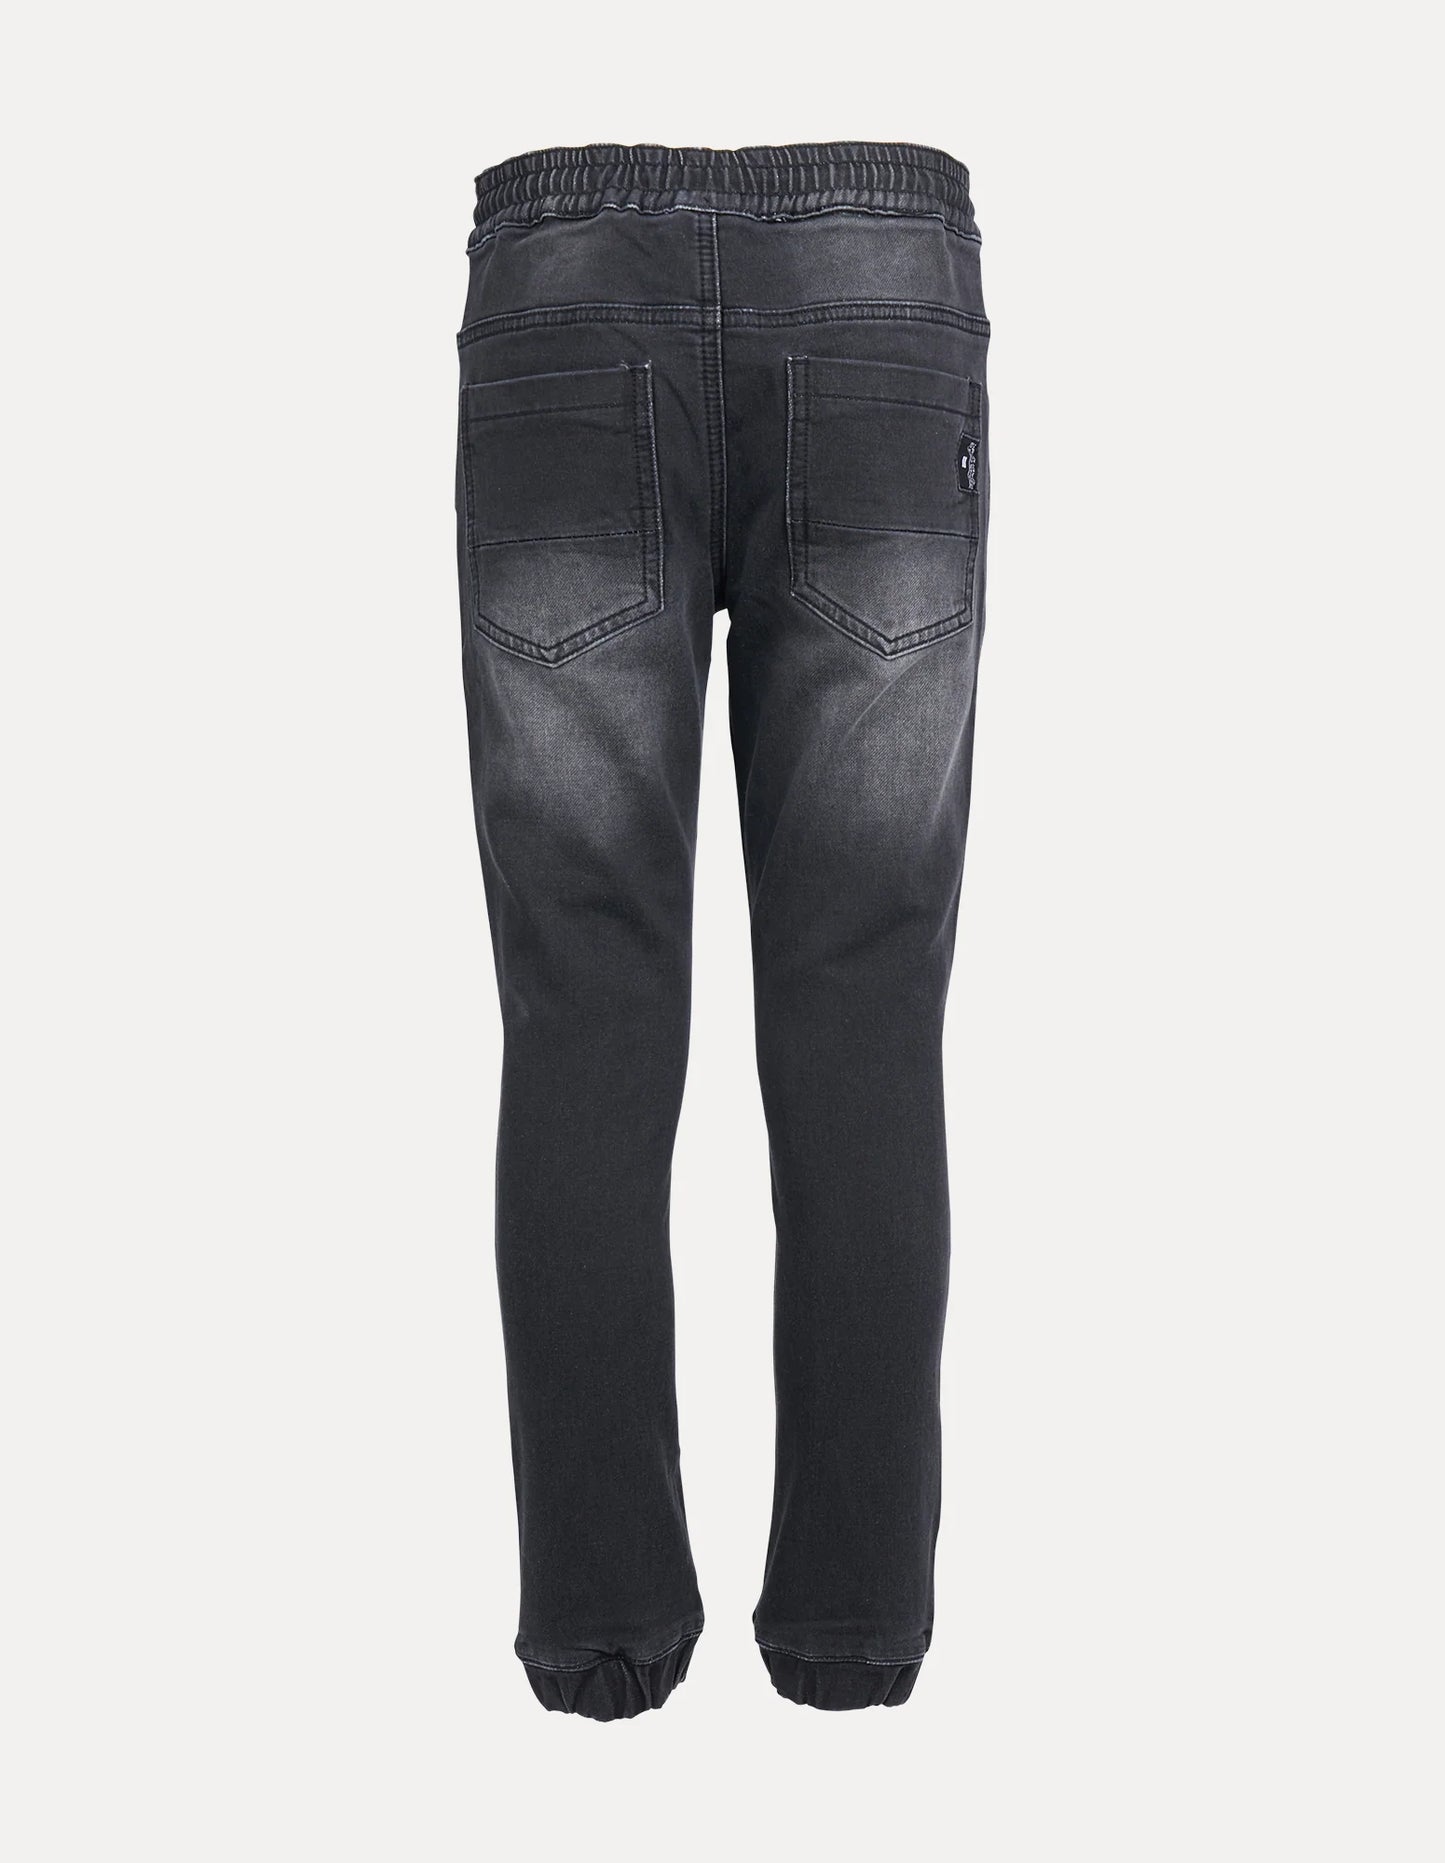 ST GOLIATH Iconic Youth Jeans - Washed Black